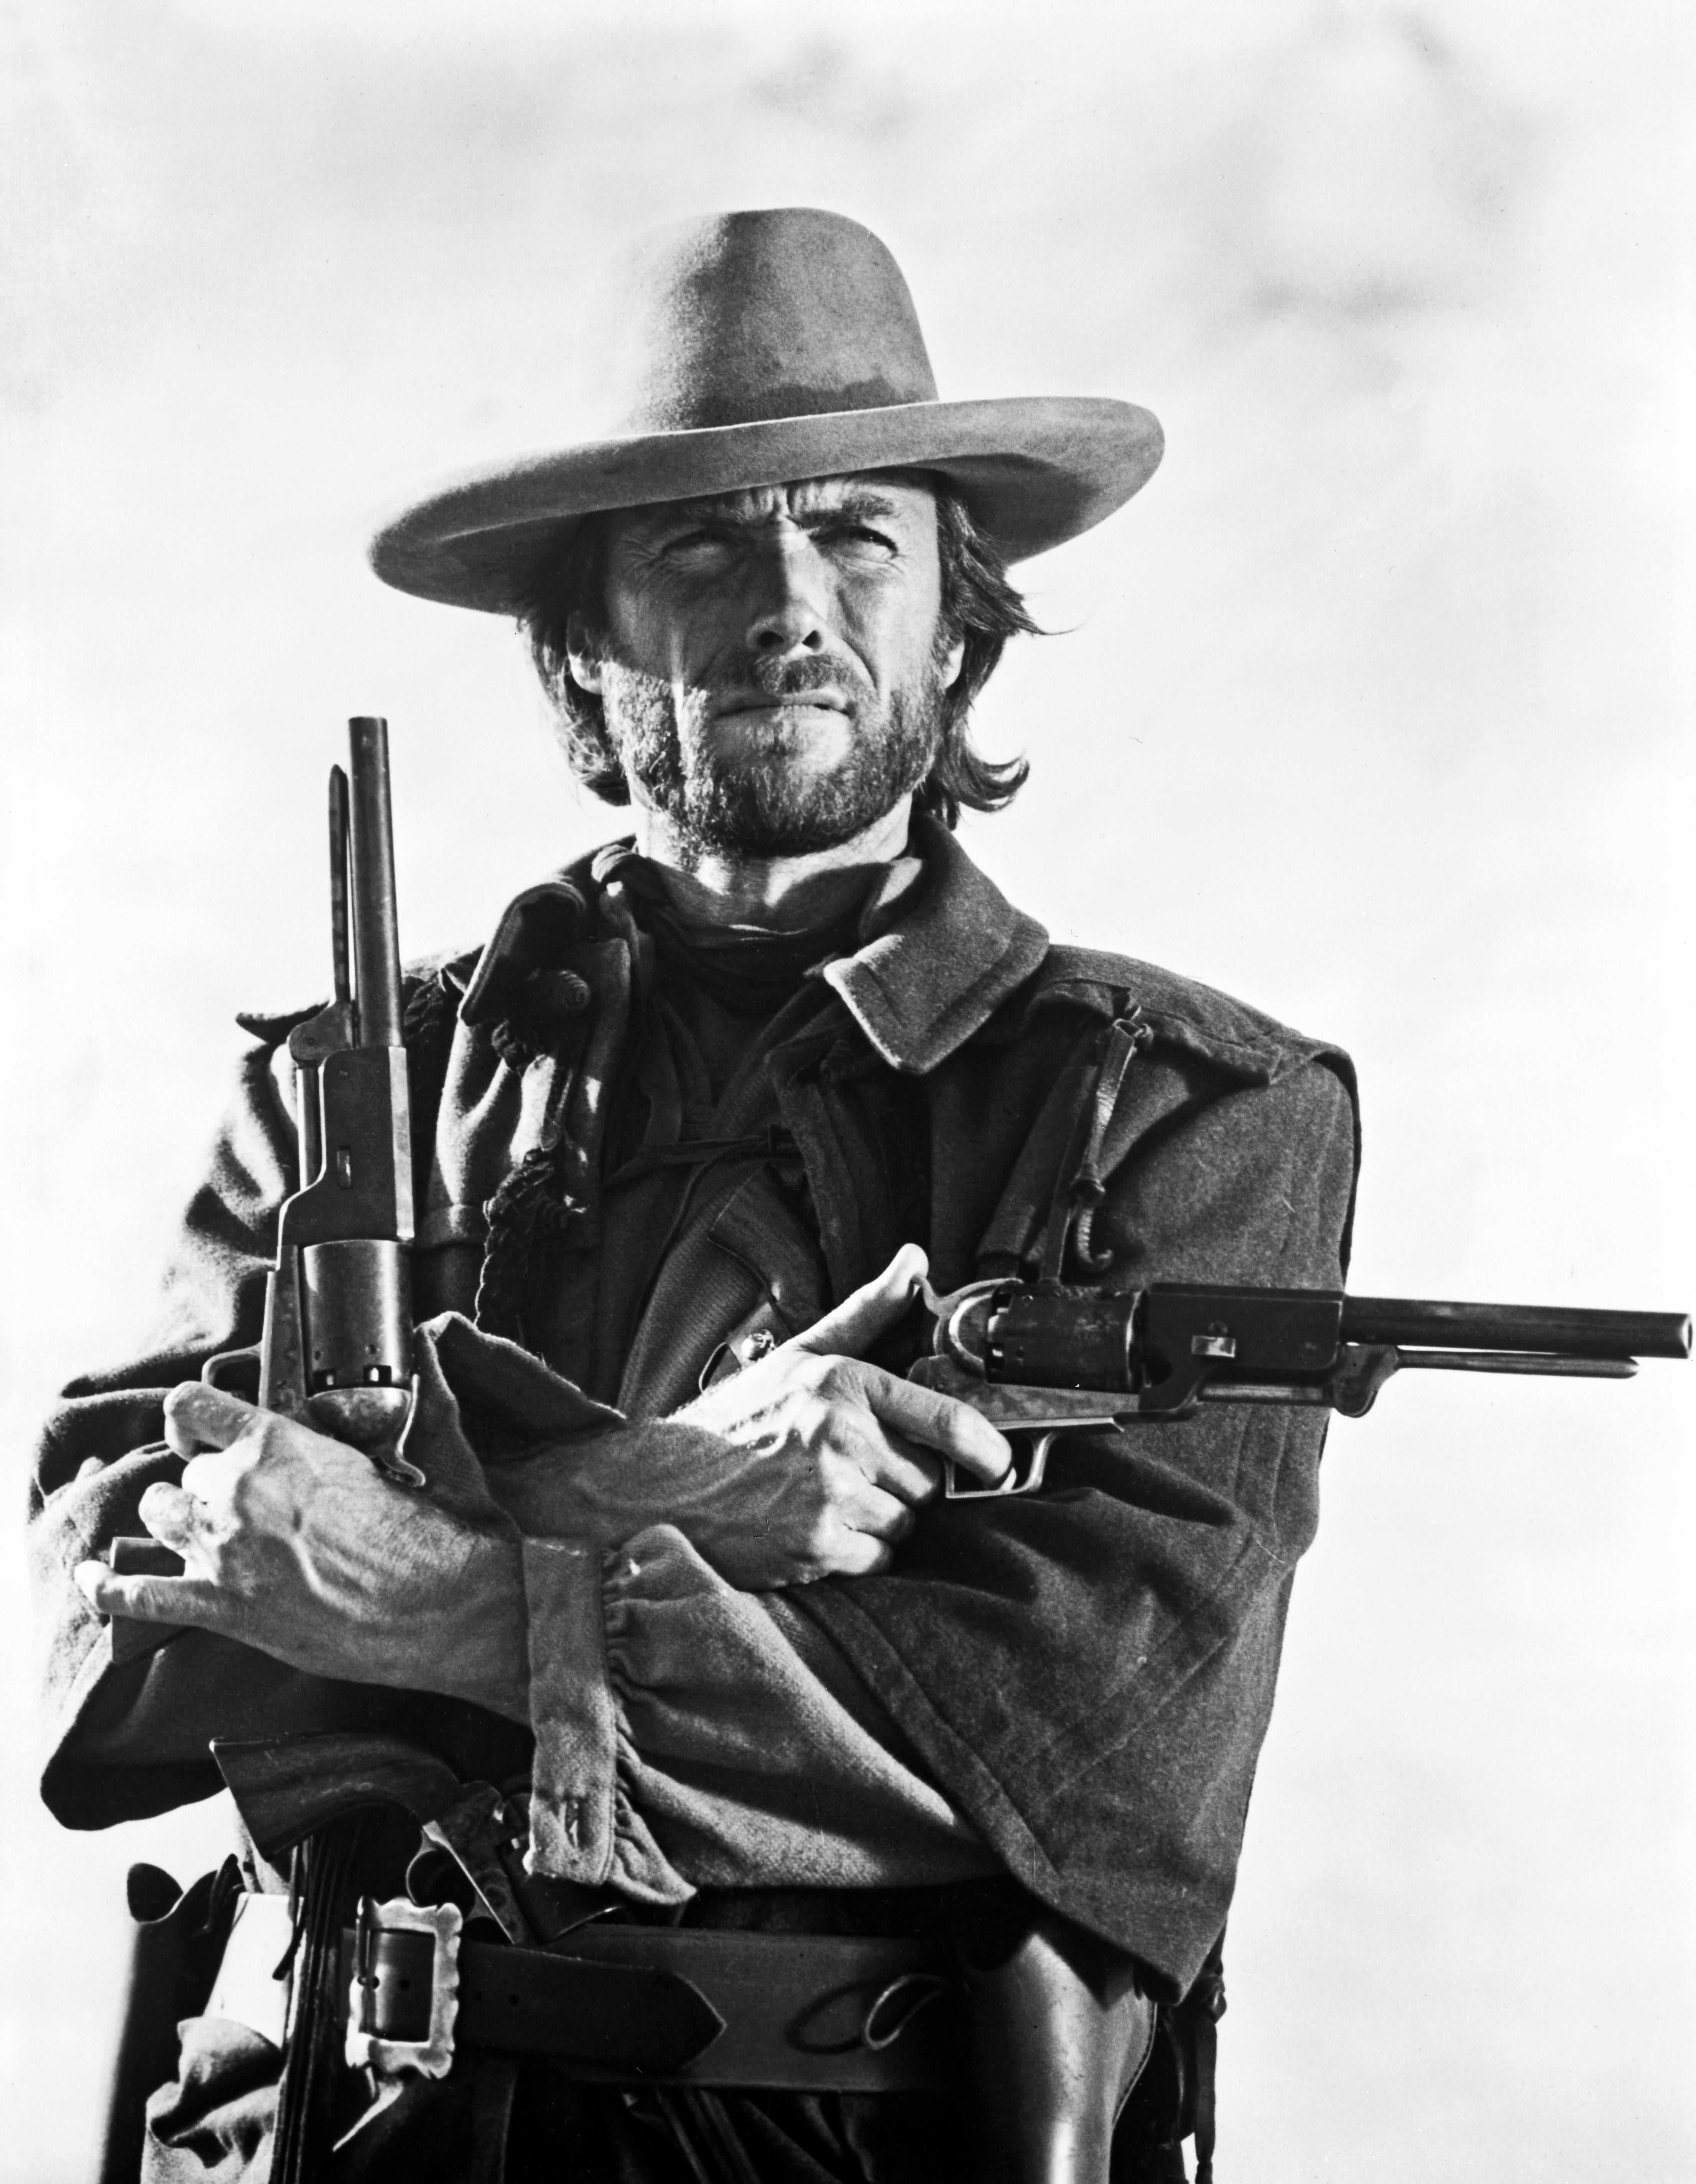 Unknown Portrait Photograph - Clint Eastwood in a scene from "The Outlaw Josey Wales" Fine Art Print